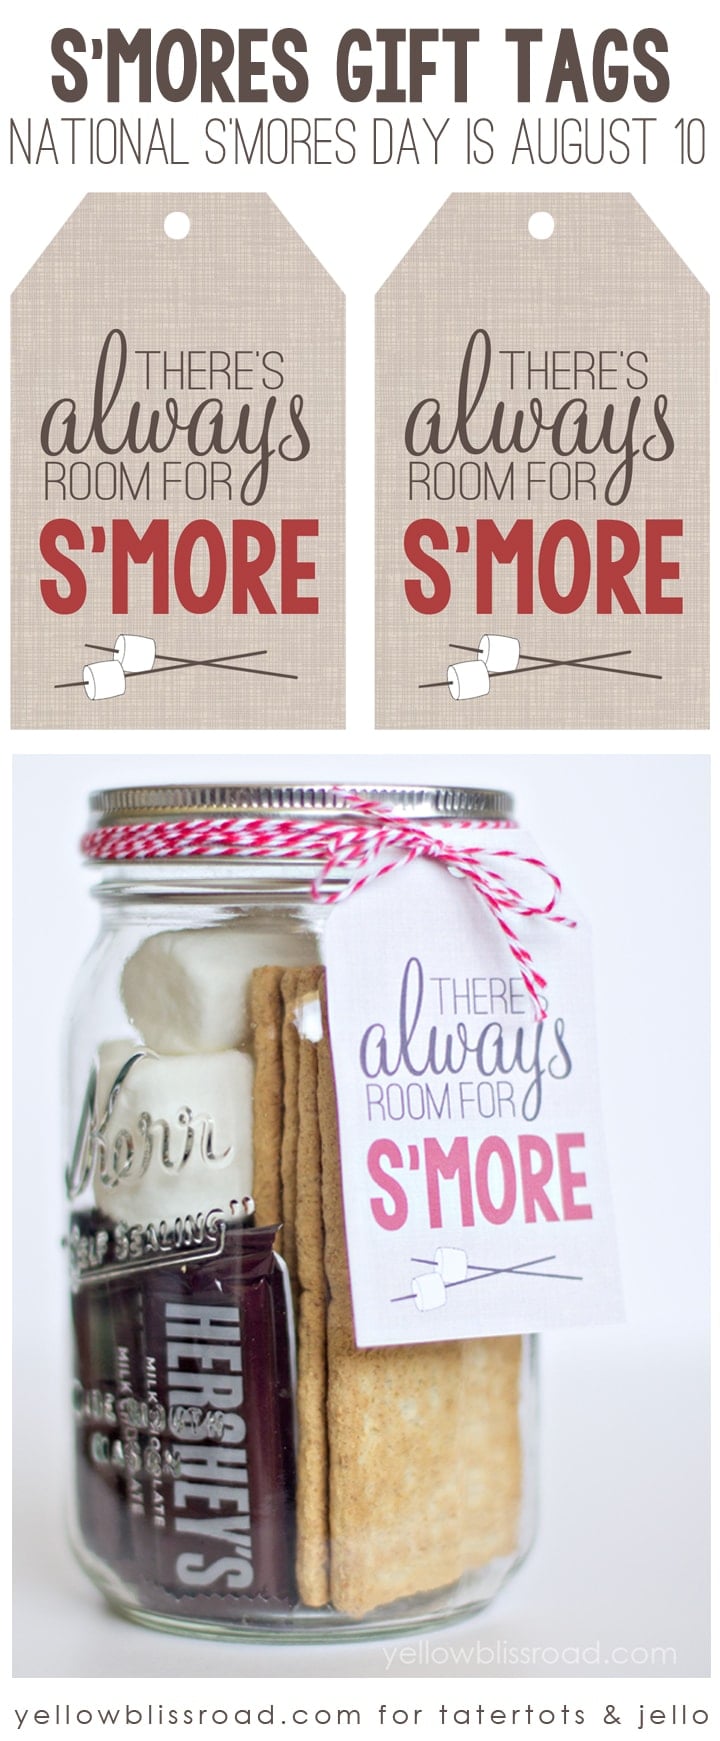 There's always room for s'more graphic